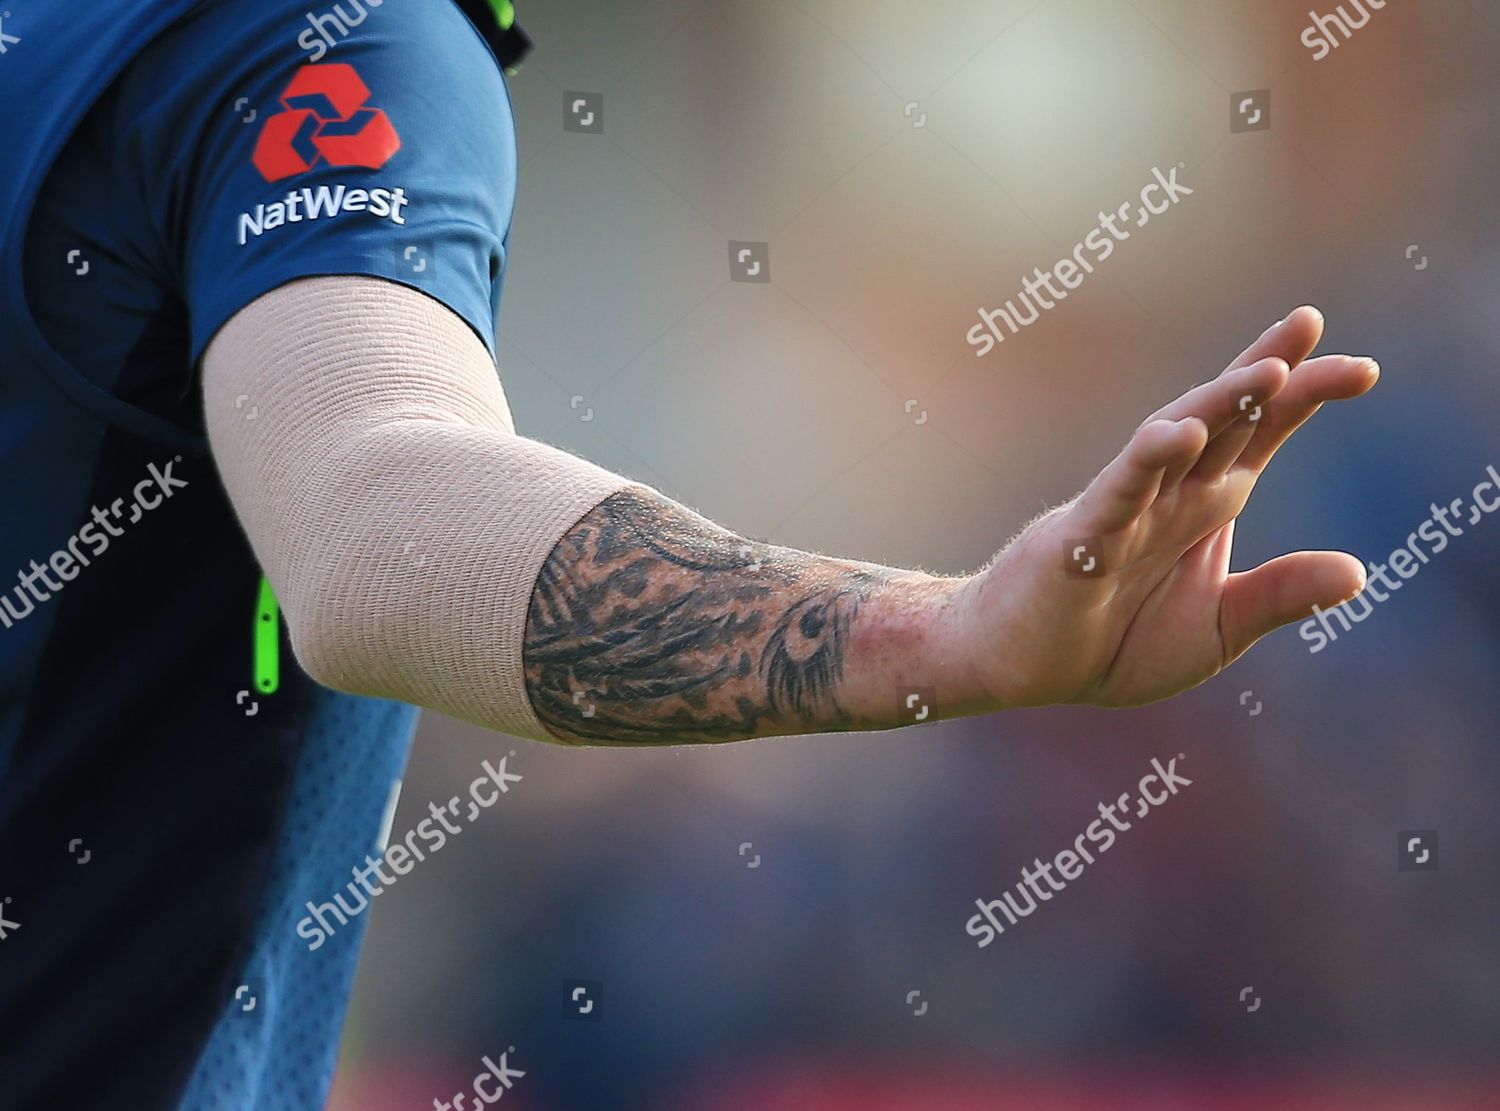 RR Shares Ben Stokes Tattoo Pic  Asks To Name A Better Tattoo KXIP Has  An Epic Yet Apt Reply  RVCJ Media